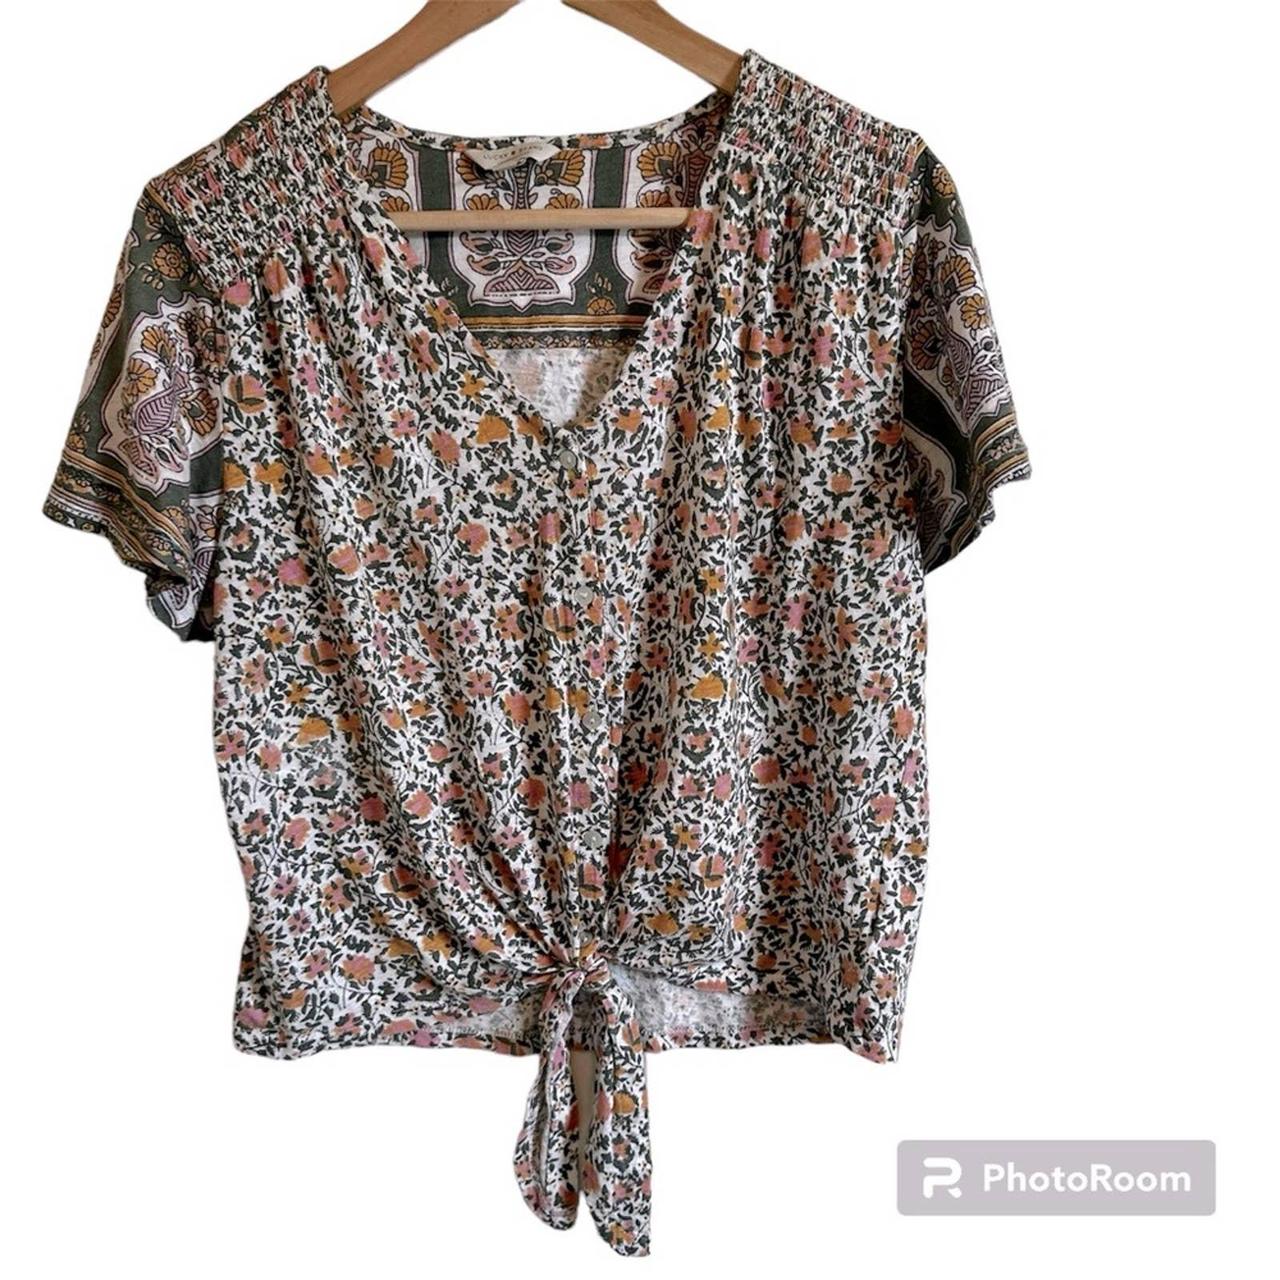 Lucky Brand Floral Print Top - Women's Shirts/Blouses in Green